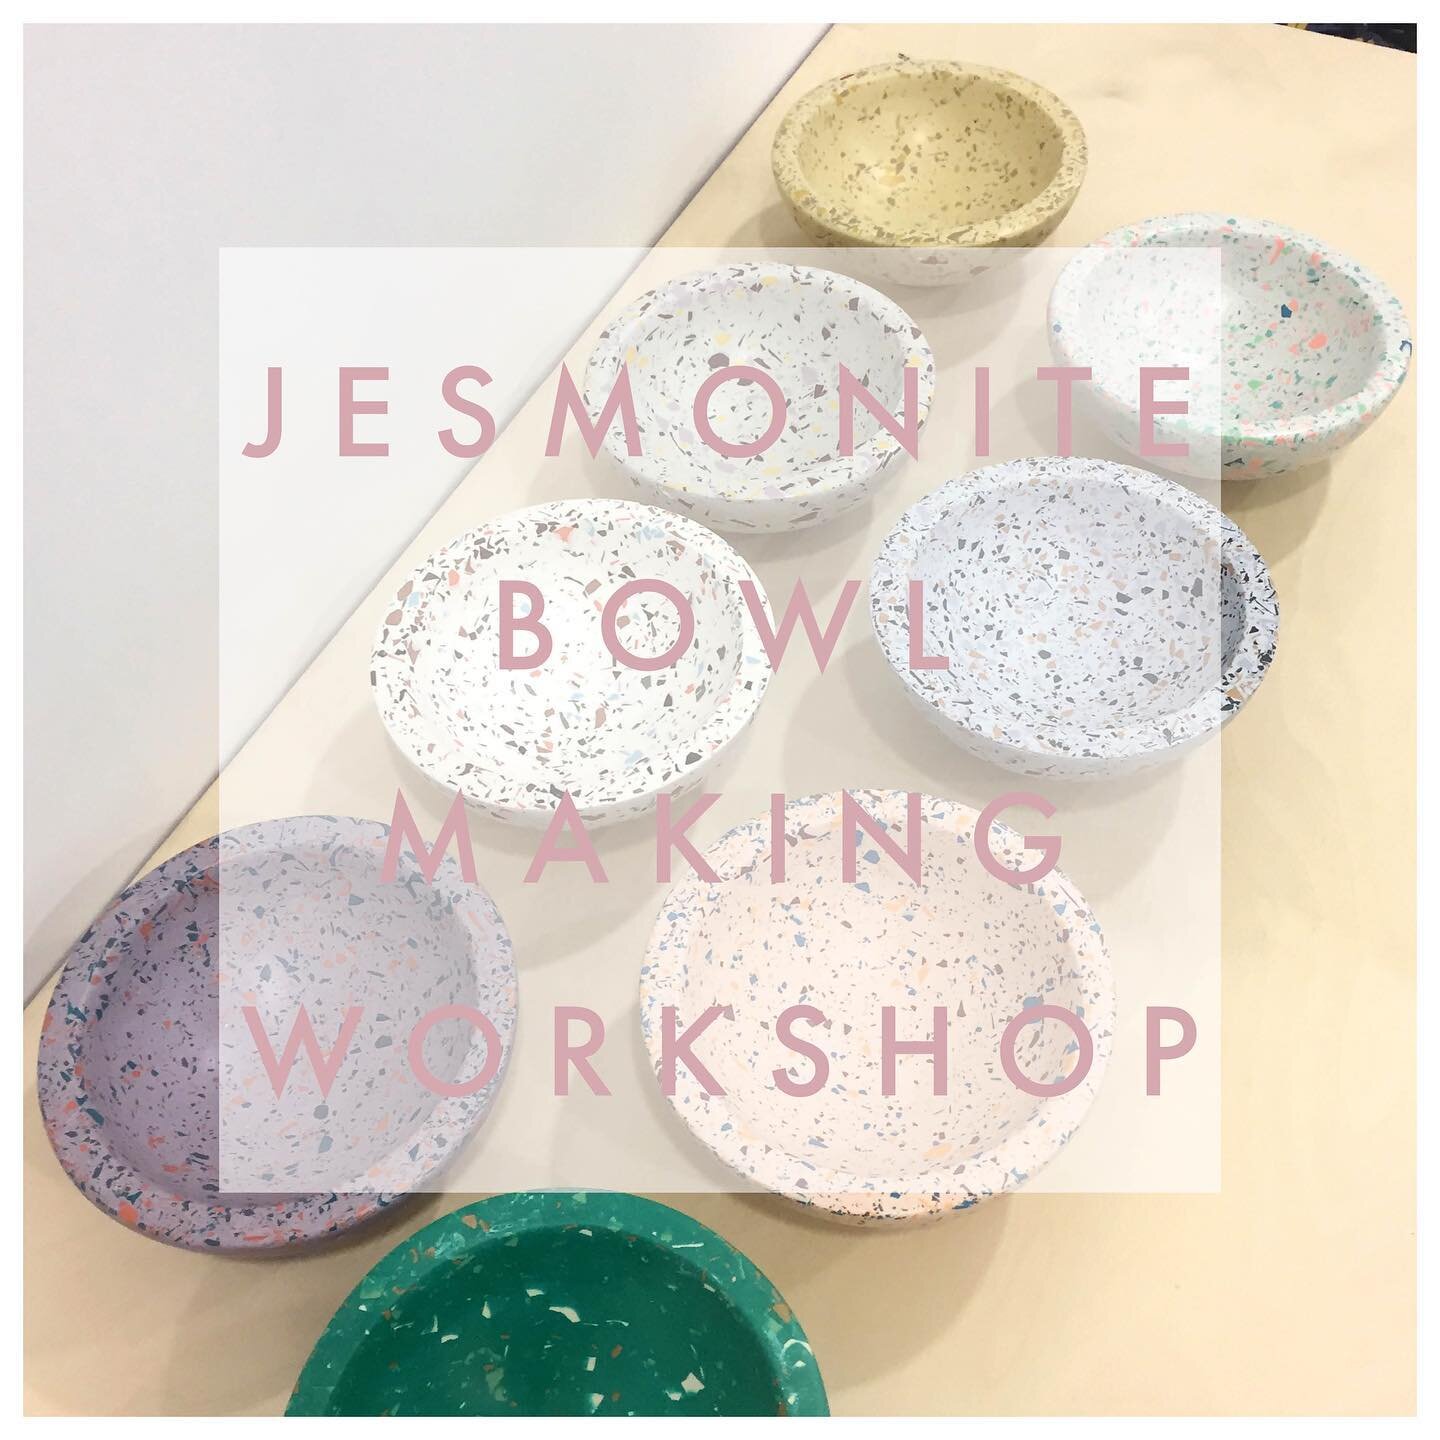 &bull;Jesmonite Bowl Making Workshop|Christmas Edition! &bull;
&bull;
Come and join me in my South London studio to learn how to prepare, mix and cast with Jesmonite to create your own unique terrazzo bowl to take home. 
The perfect Christmas gift! &